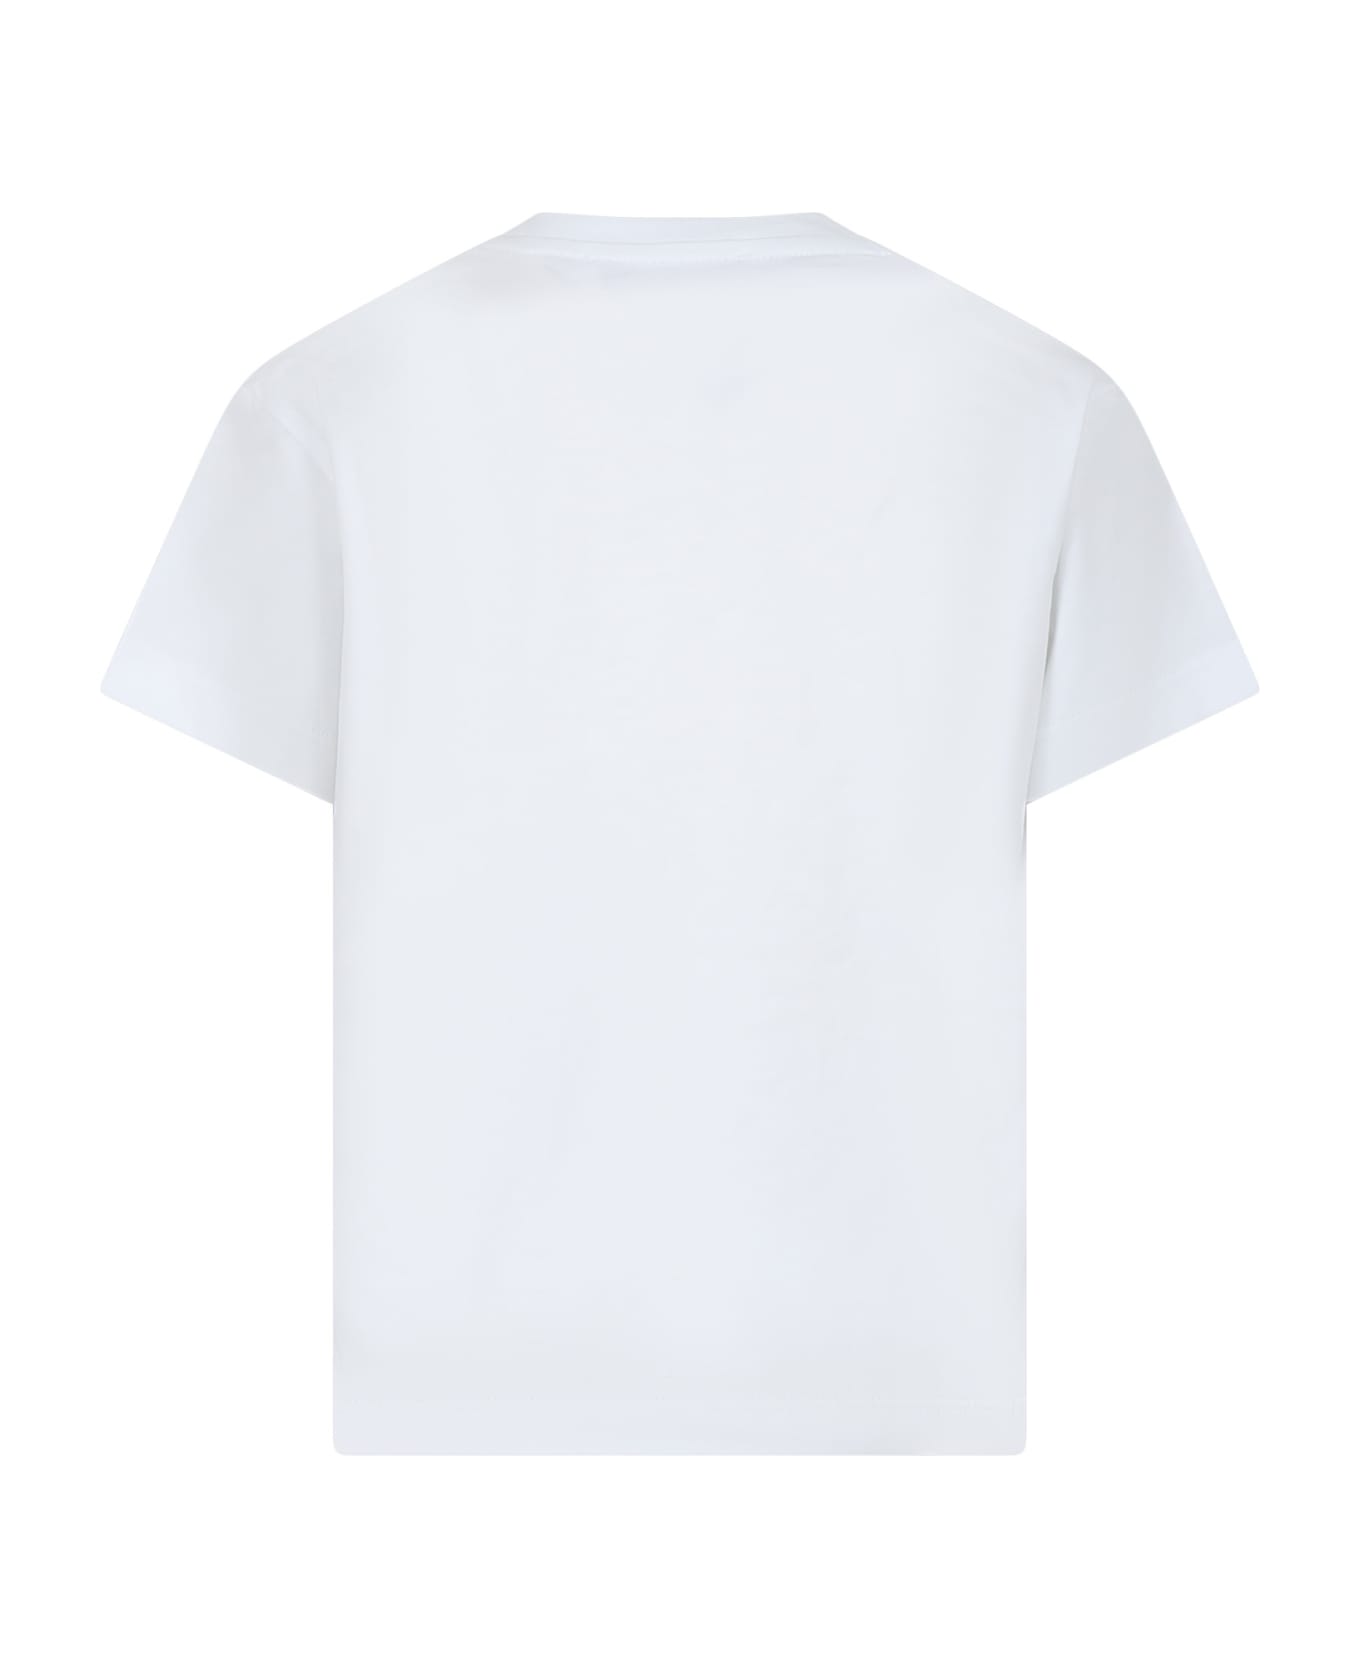 MSGM White T-shirt For Girl With Logo And Rhinestones - White